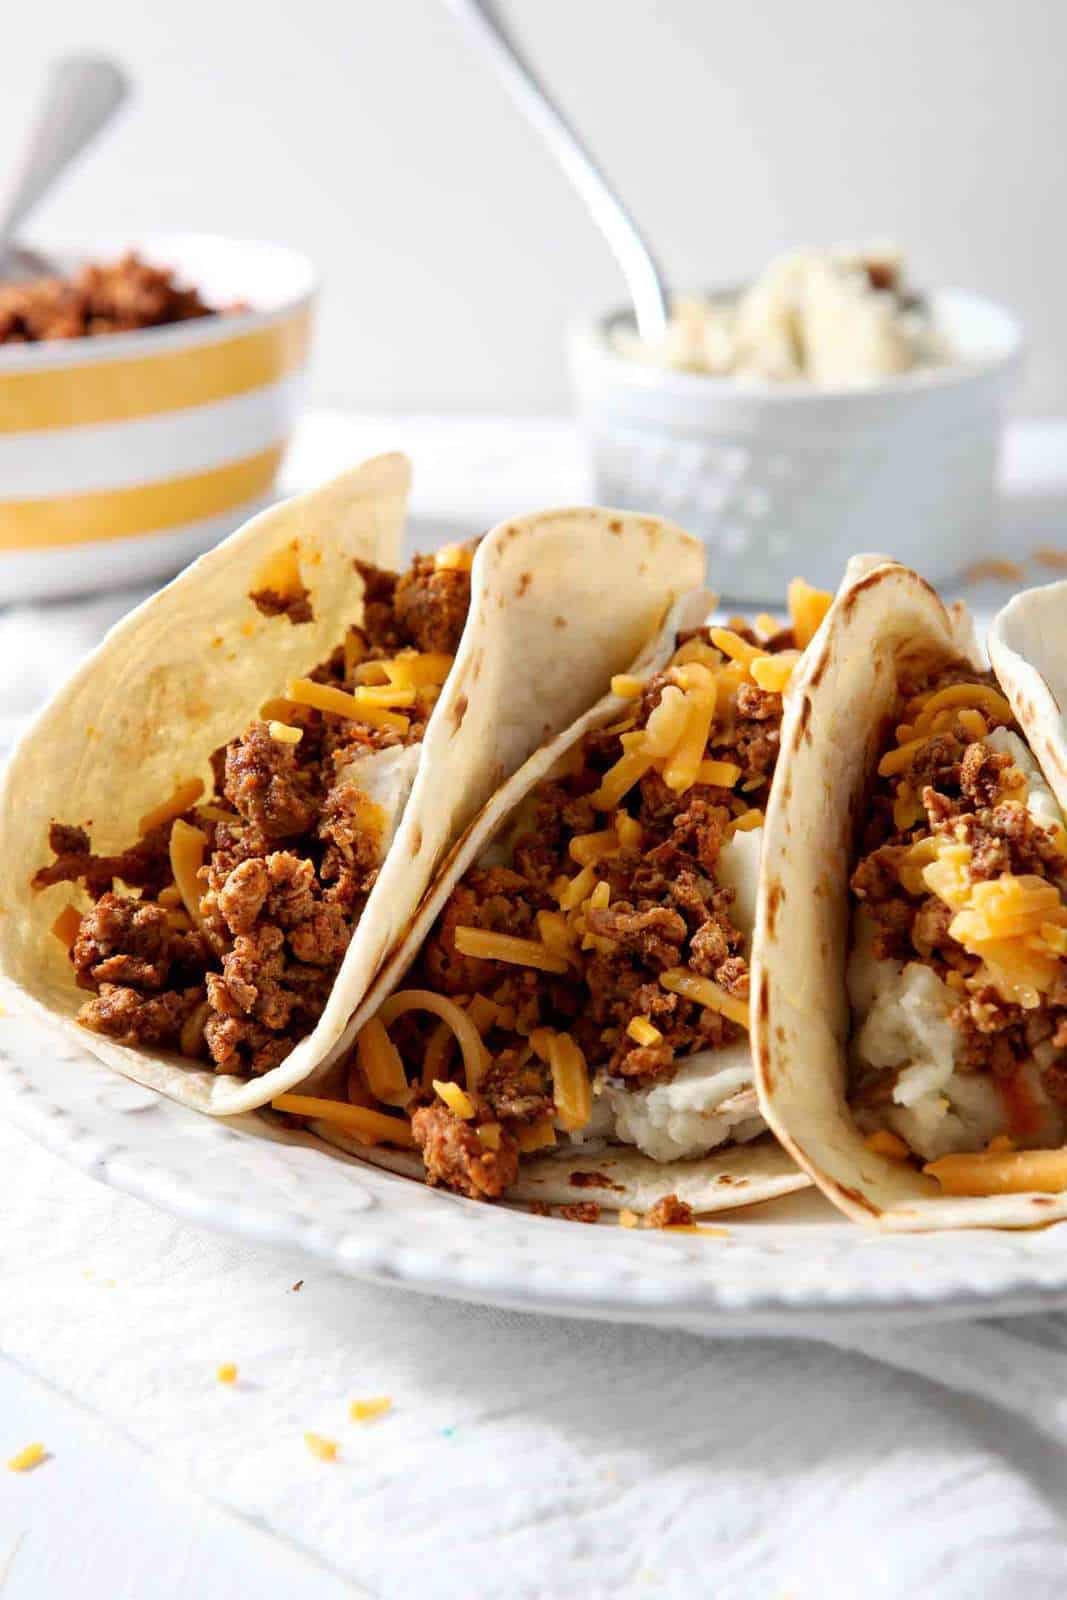 In search of the ultimate comforting breakfast? Look no farther than Mashed Potato Chorizo Breakfast Tacos! These tacos, made with store-bought chorizo and homemade mashed potatoes, are the stuff dreams are made of. They cook up quickly to create a flavorful meal! Easy to make ahead of time and freeze, these breakfast tacos are an ideal dish to bring a new mama, friends who moved, etc. Mashed Potato Chorizo Breakfast Tacos are an amazing meal!